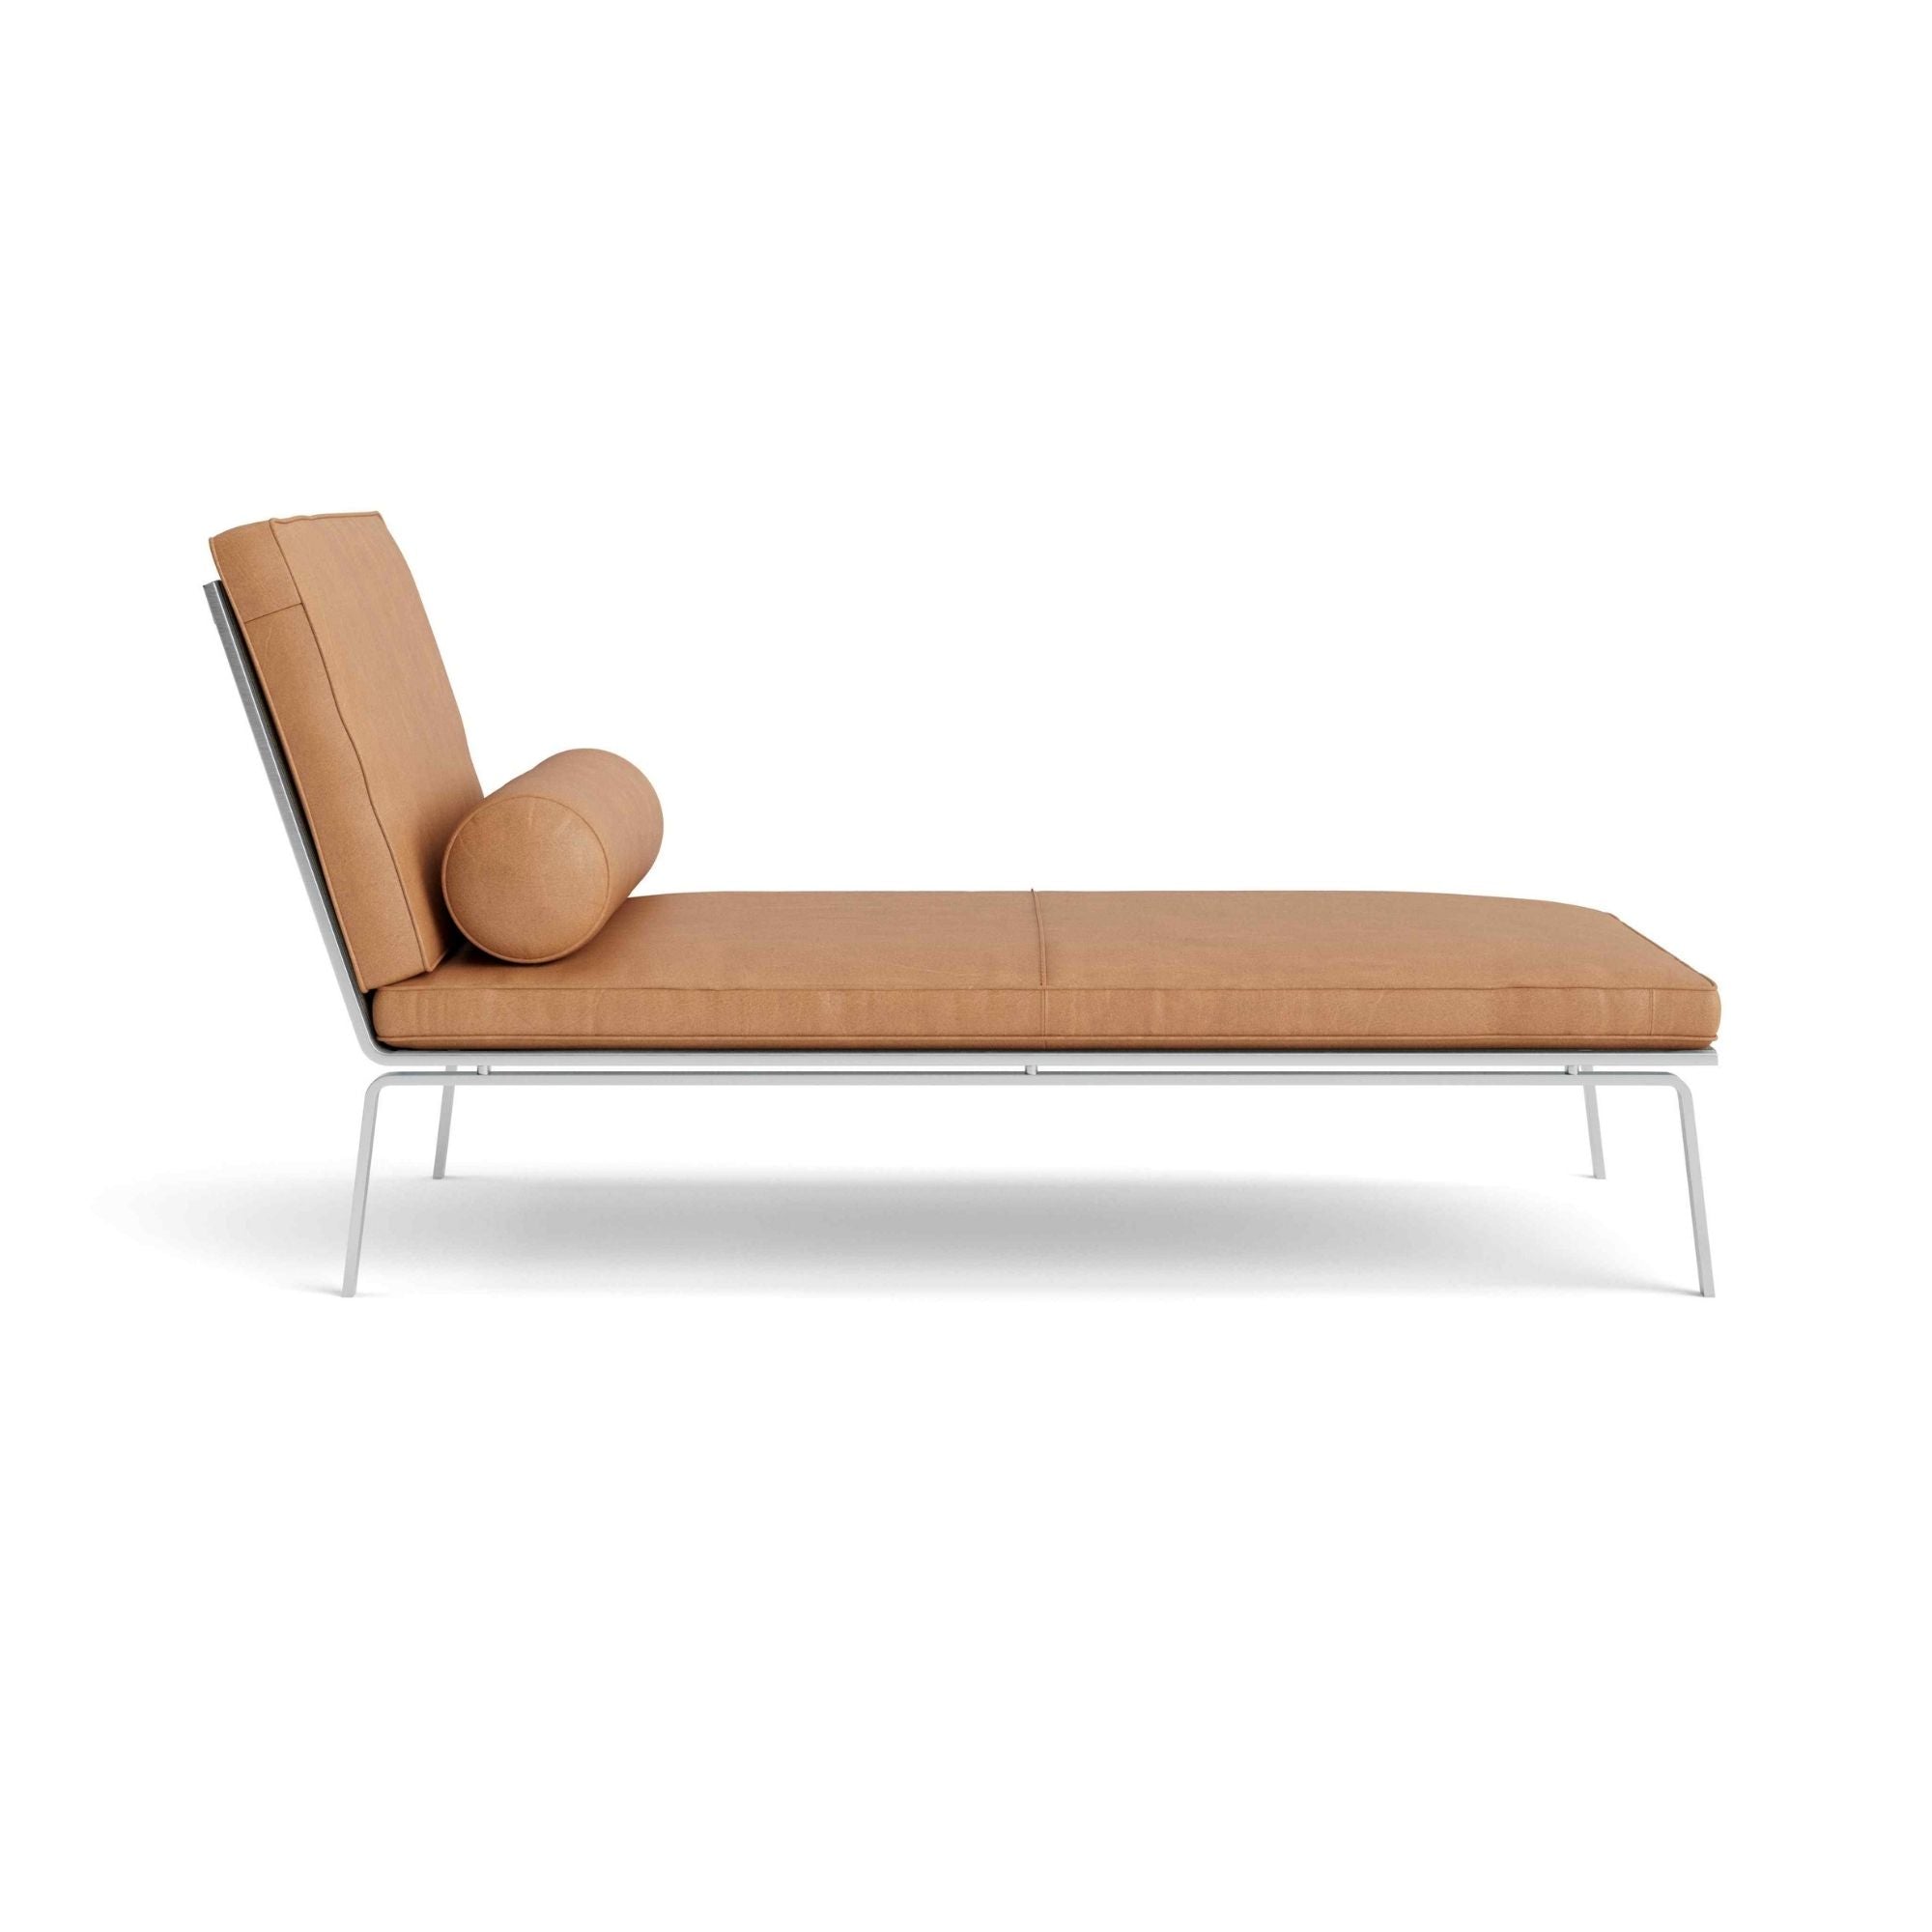 Man Chaise Lounge - Leather - THAT COOL LIVING